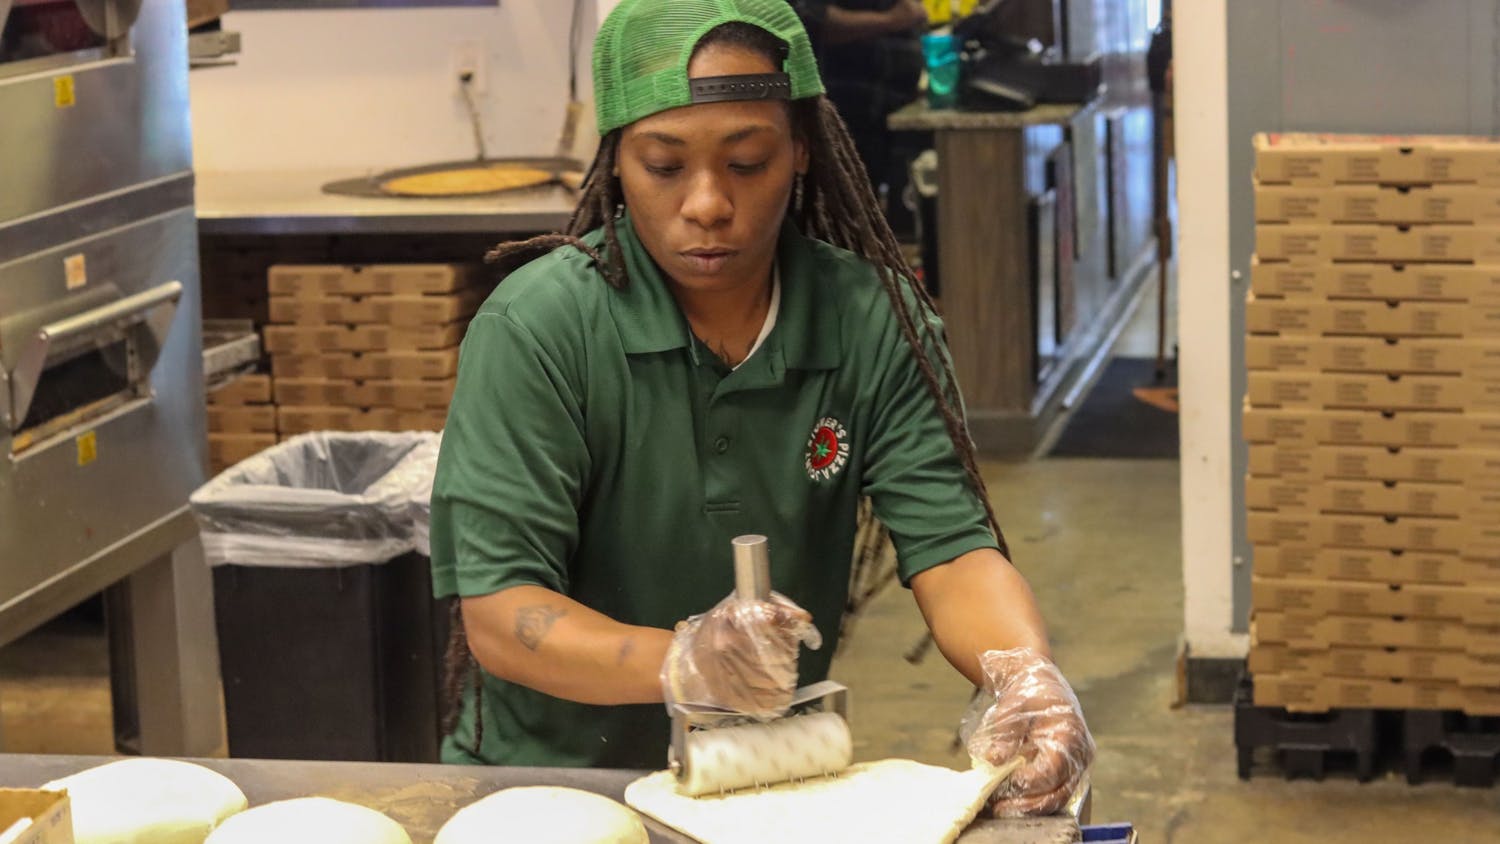 Quinotrese Johnson, a general manager at Stoner’s pizza, rolls dough on March 25, 2022. Johnson said she believes strongly in providing assistance to those in need and uses her position to help out in any way she can.